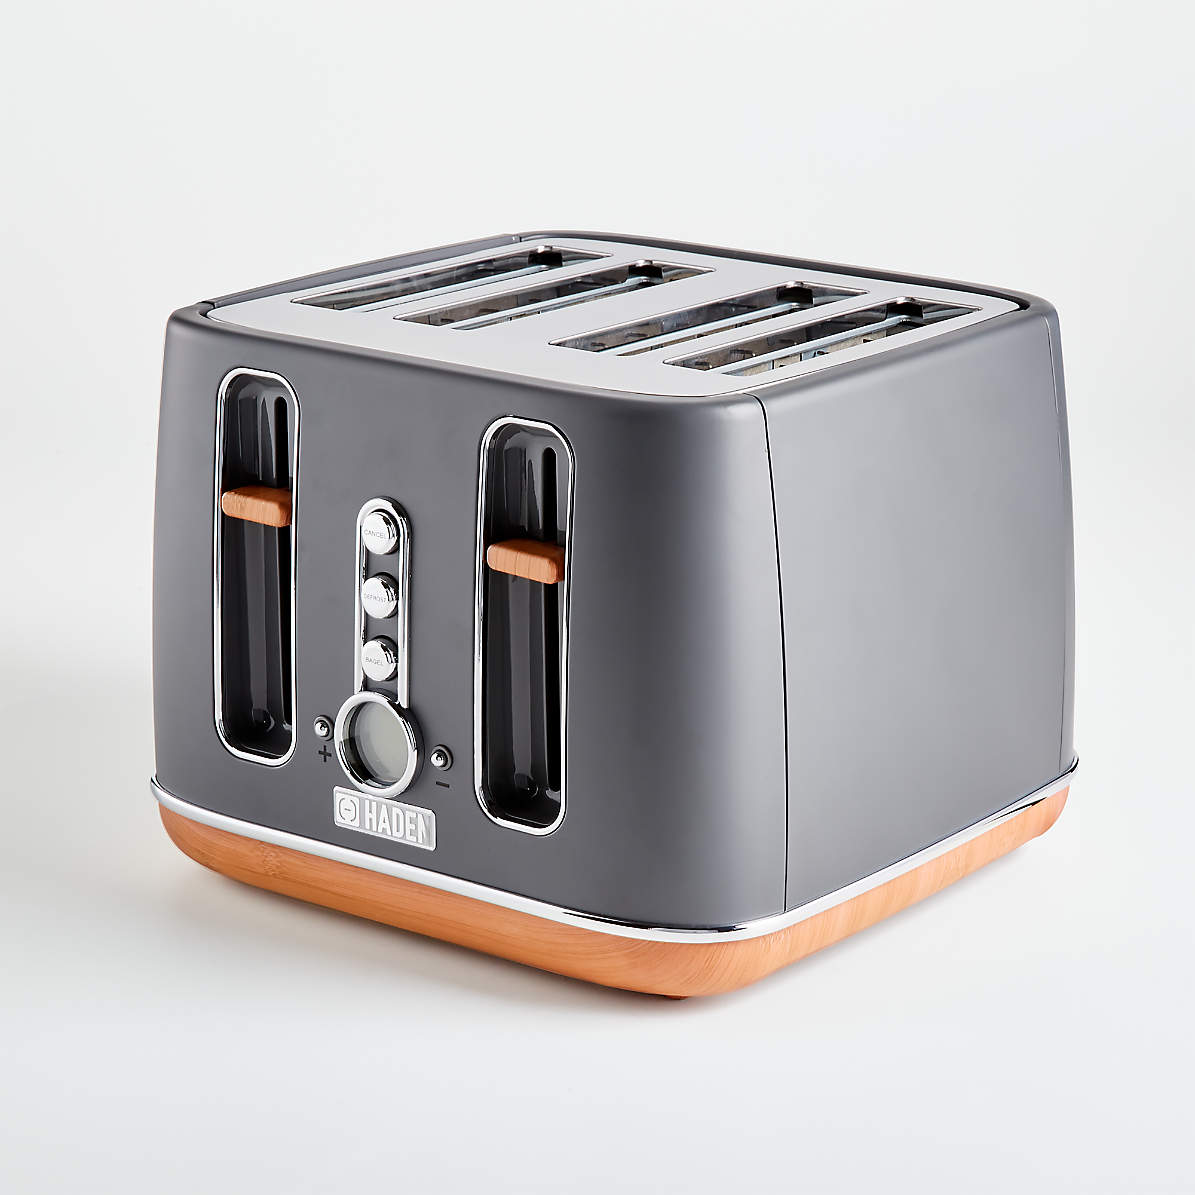 -NEW AND BOXED--GREY Moulinex MOULINEX GRILLE PAIN T42-A  TOASTER 